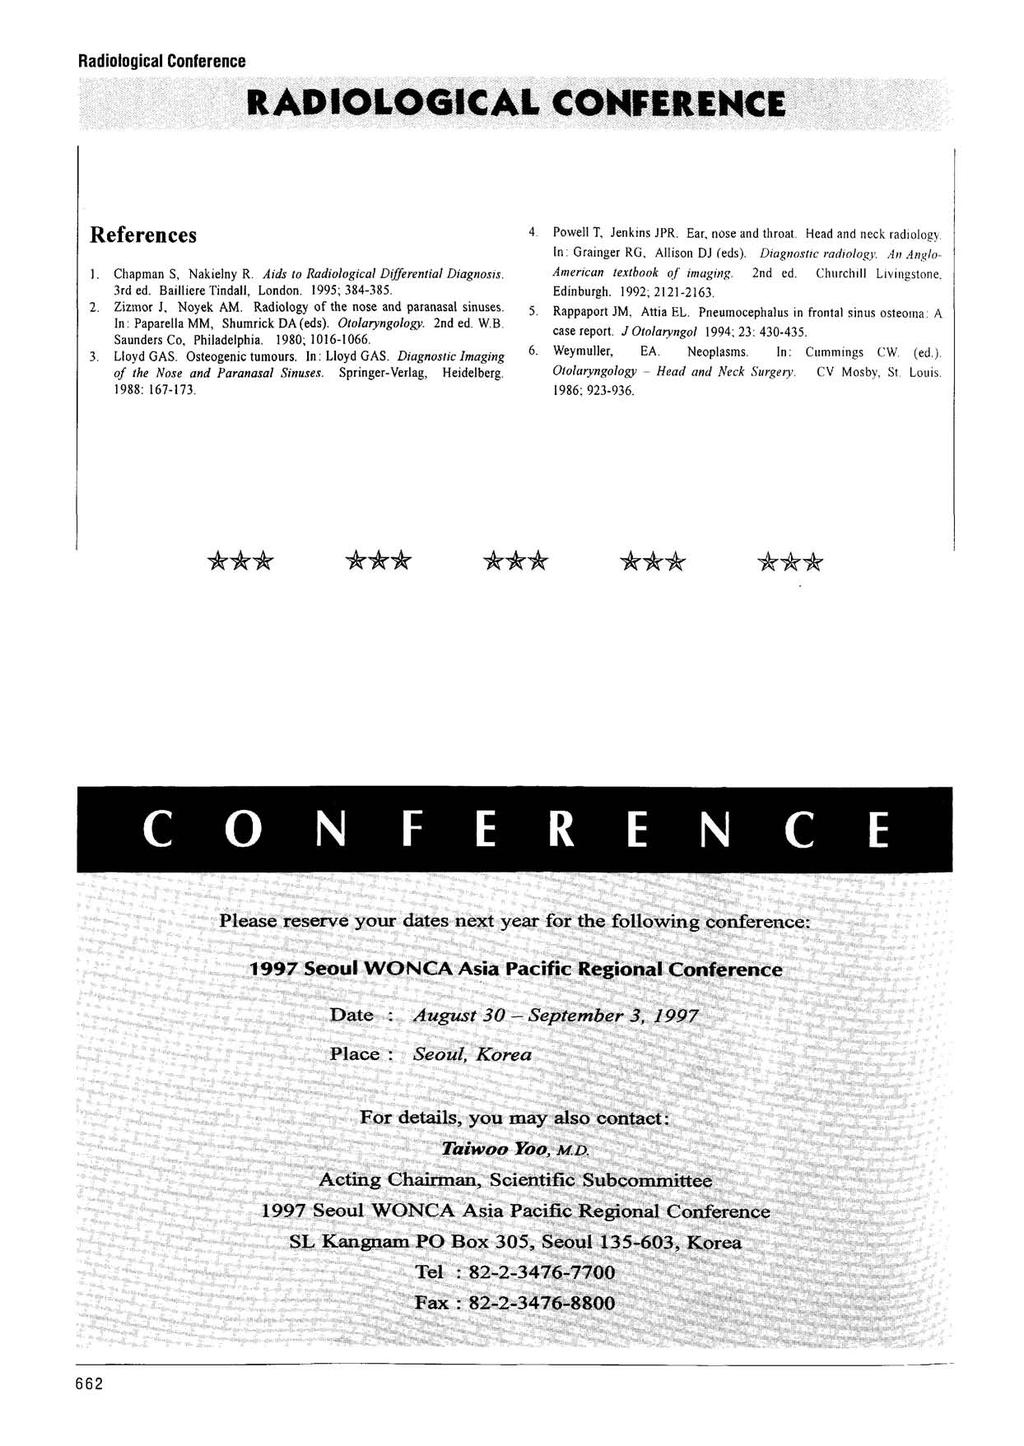 Radiological Conference RADIOLOGICAL CONFERENCE References 1. Chapman S, Nakielny R. Aids to Radiological Differential Diagnosis. 3rd ed. Bailliere Tindall, London. 1995; 384-385. 2.